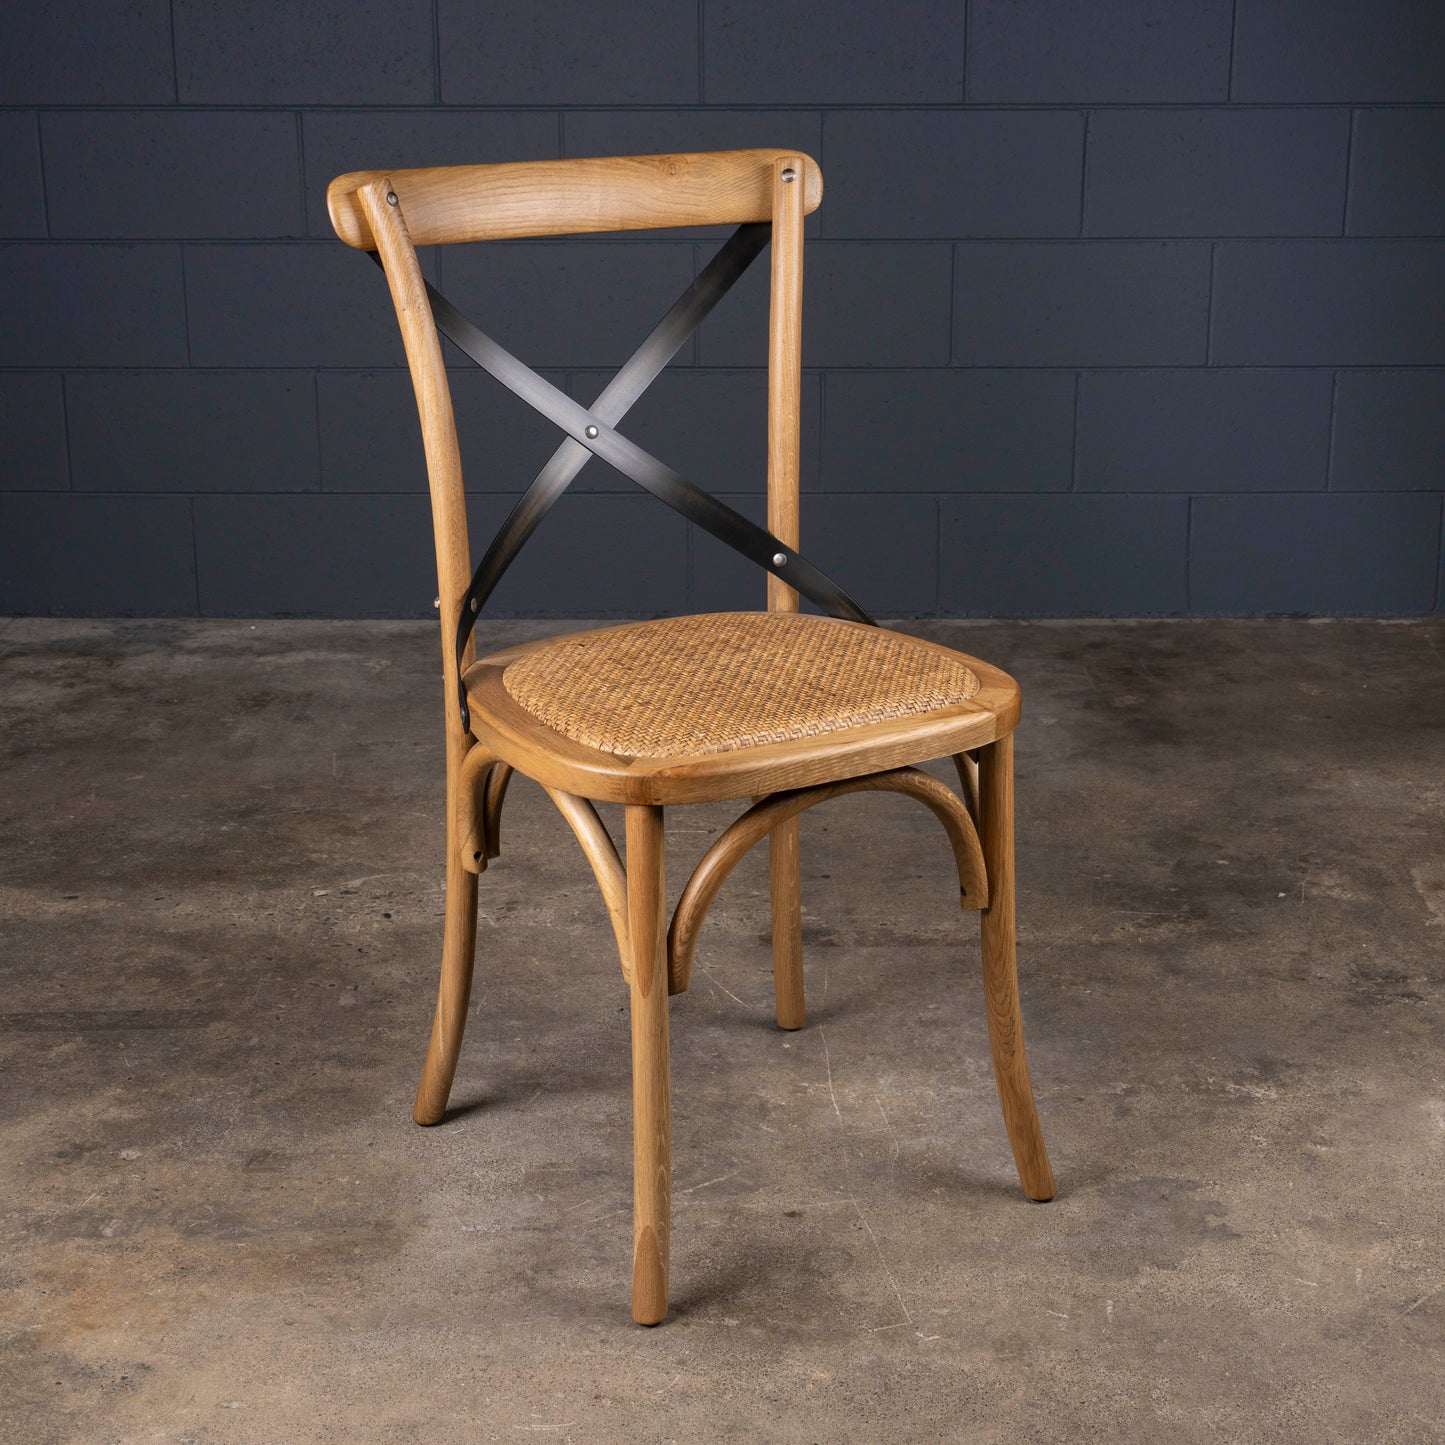 Paris Crossover Dining Chair